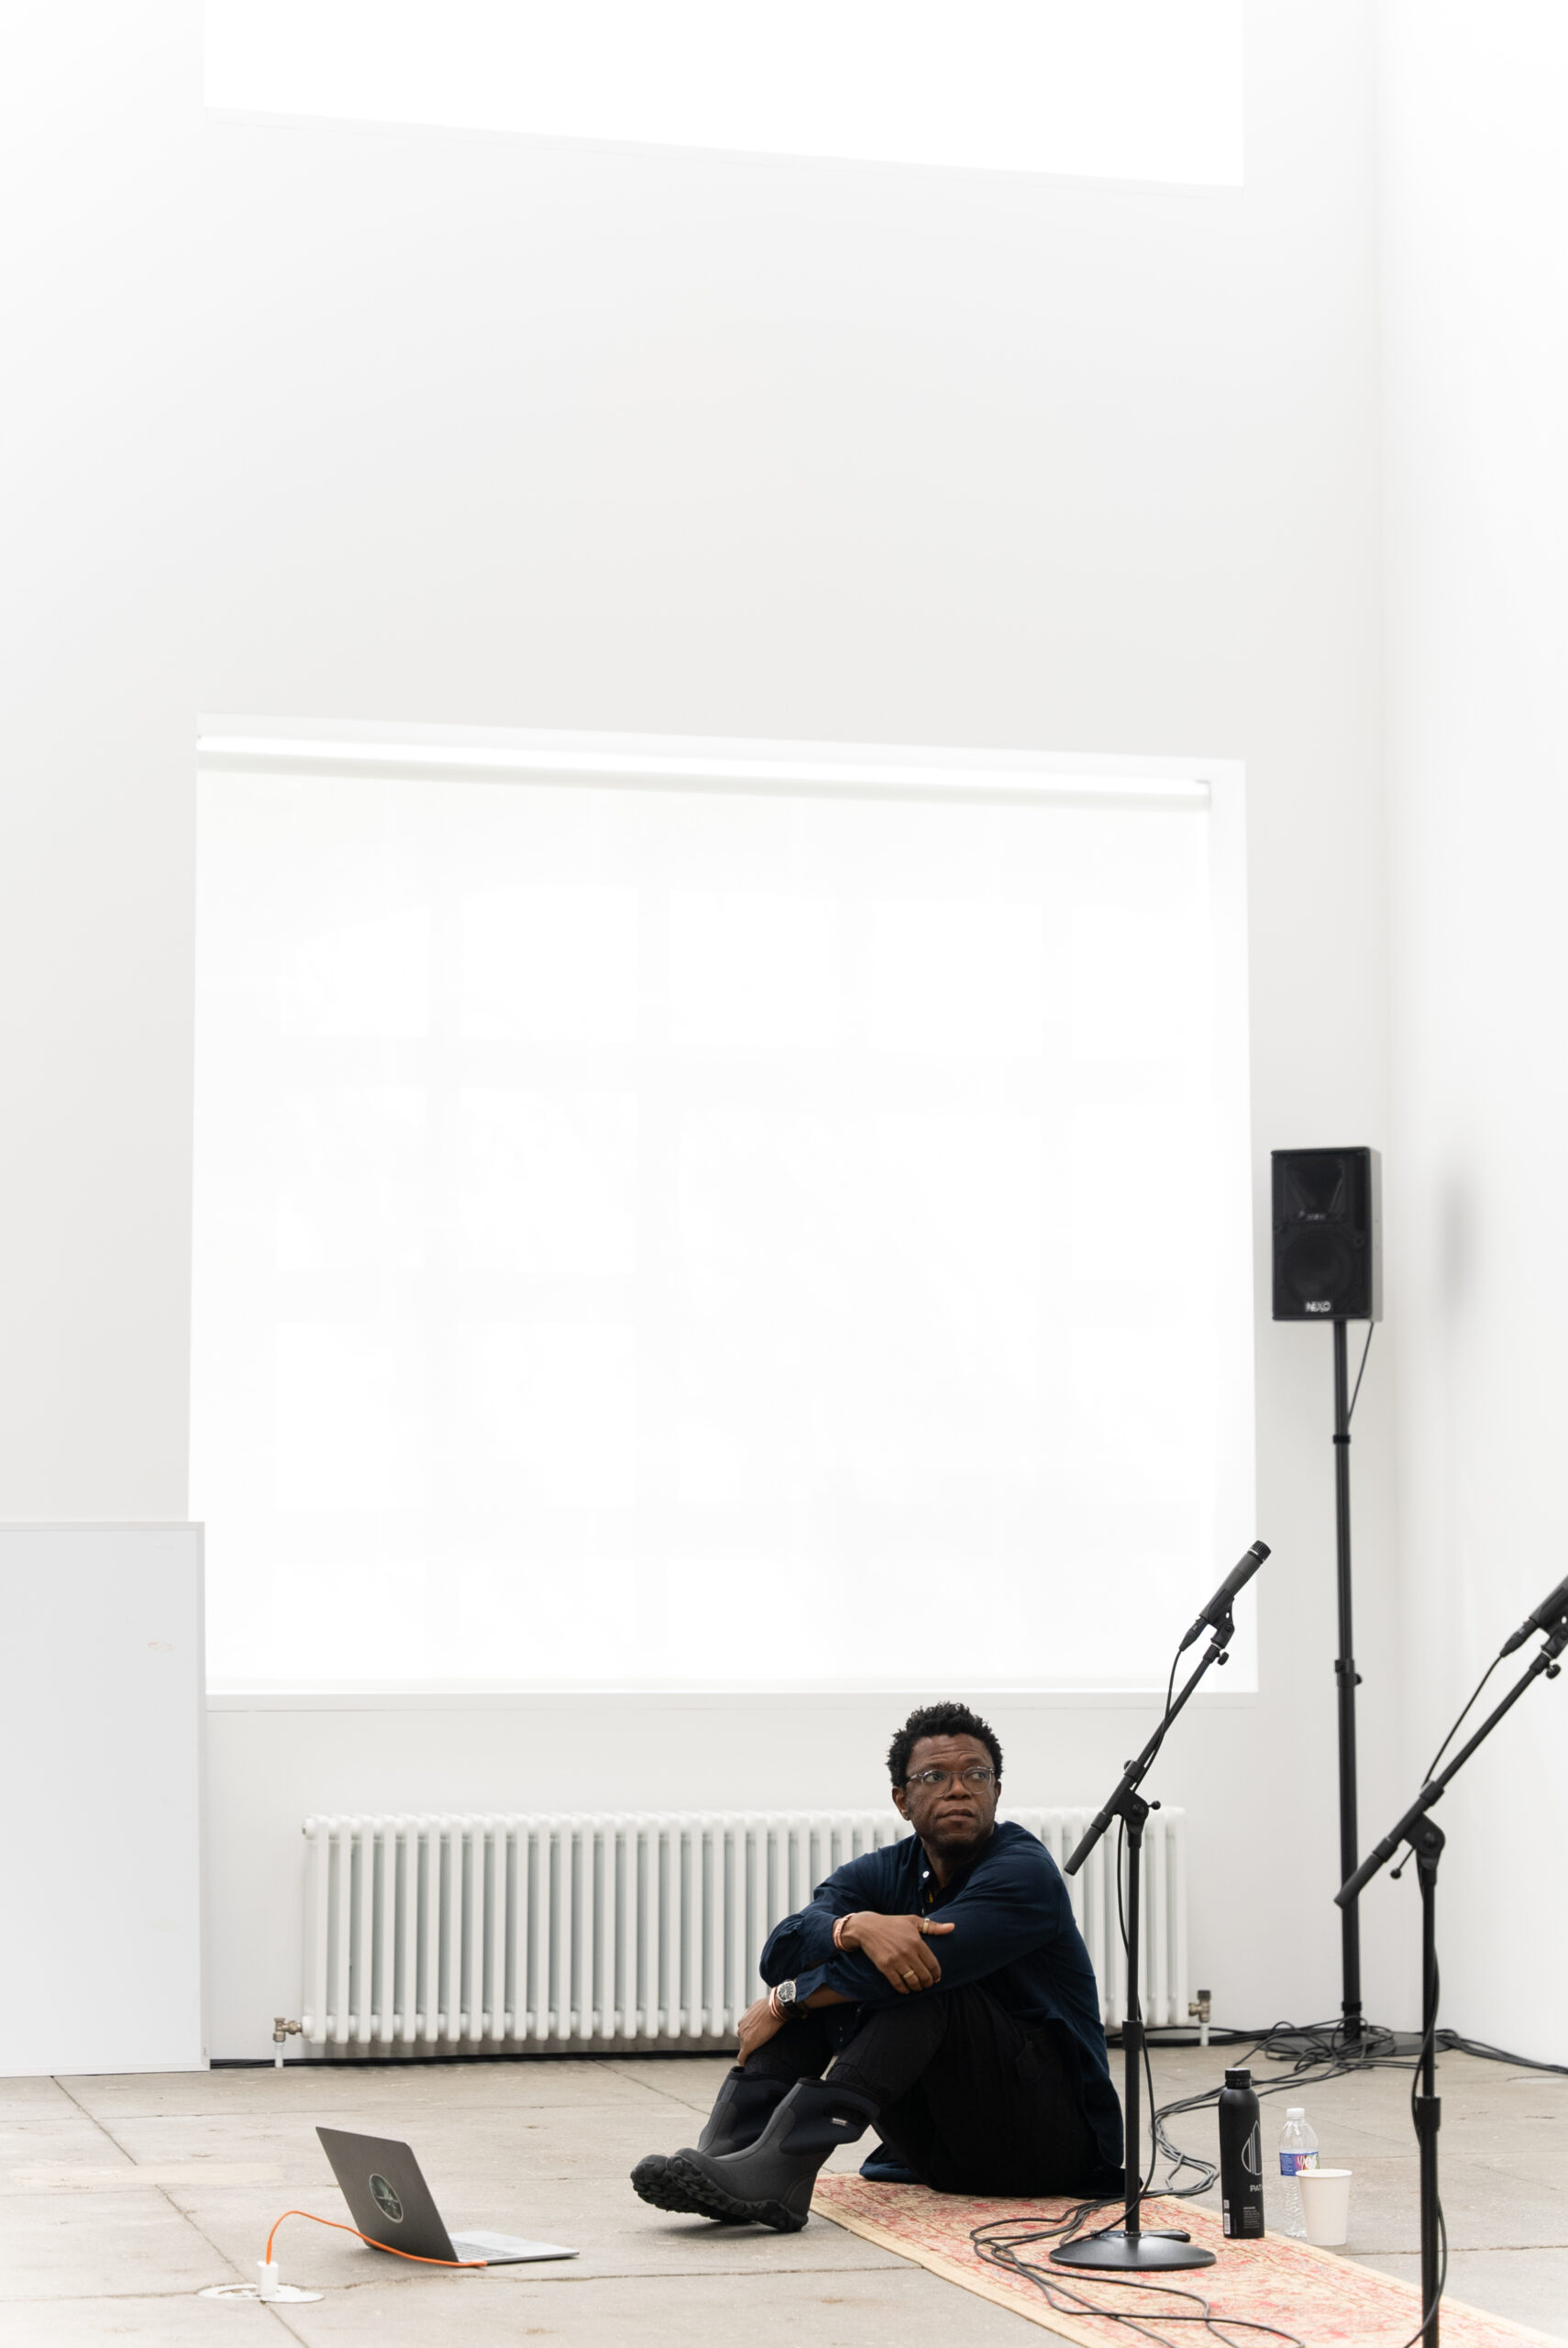 Image of the artist sitting on the floor during rehearsal